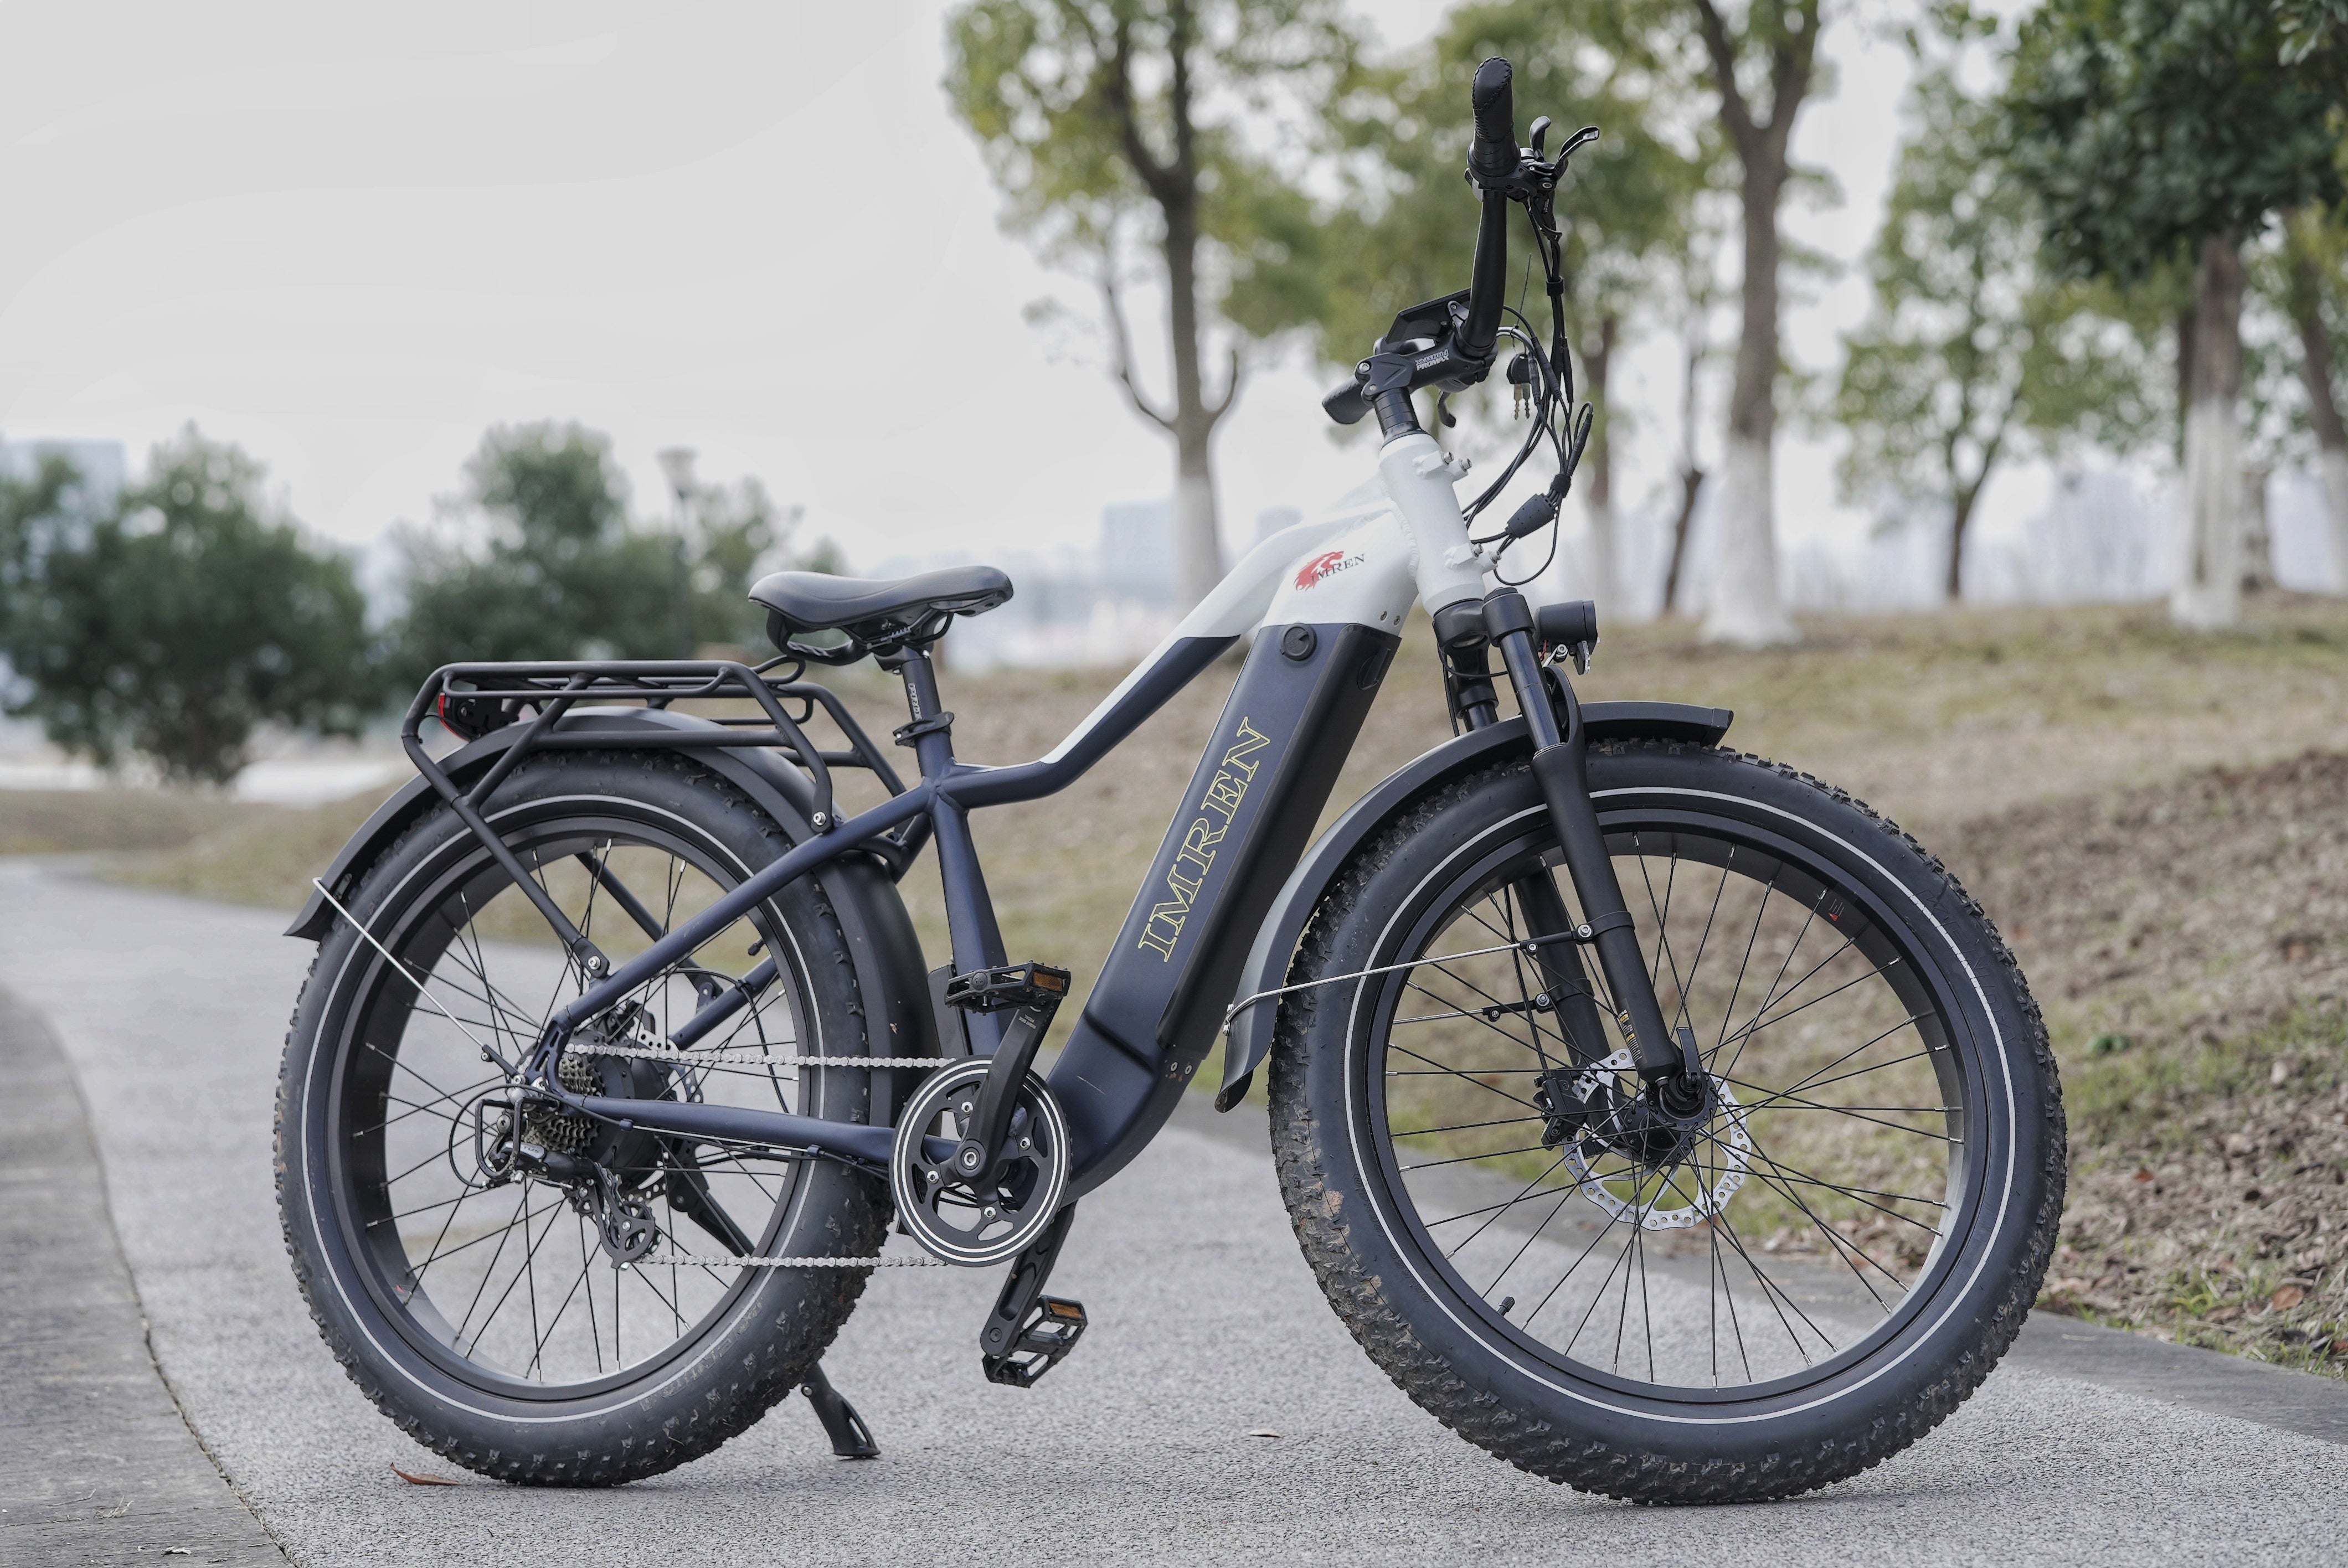 Other Key E-bike Features and Components